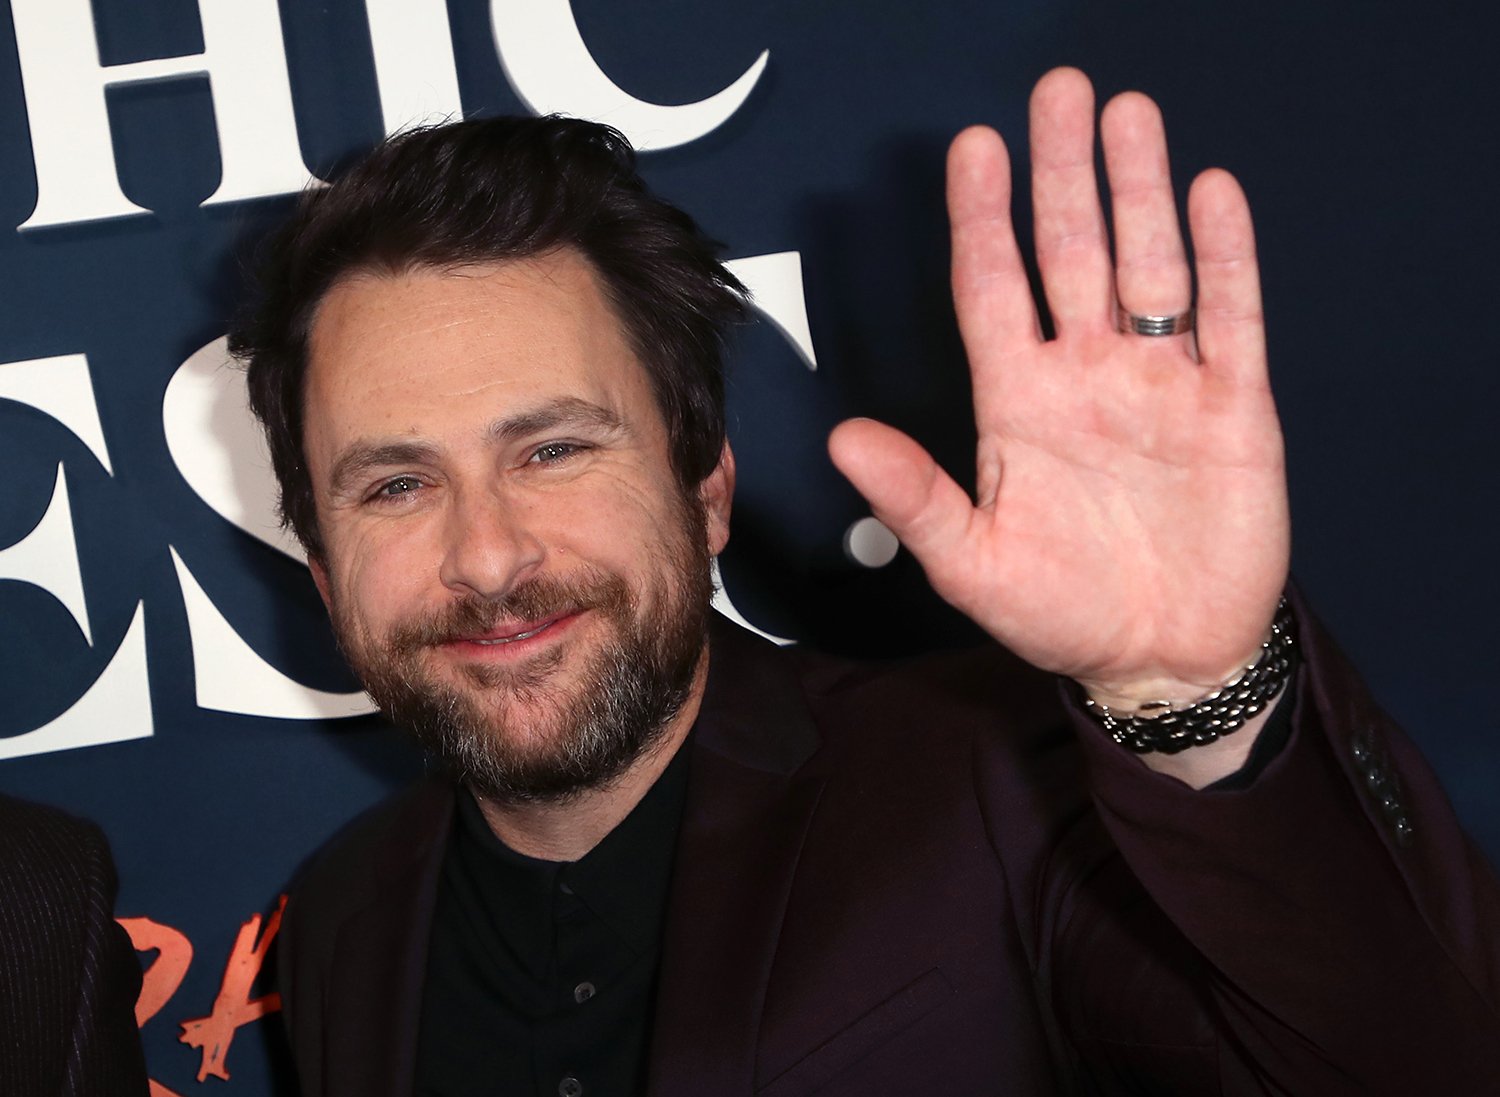 Charlie Day attends the 'Mythic Quest: Raven's Banquet' premiere. Charlie Day will portray Luigi in the upcoming Super Mario Bros. film